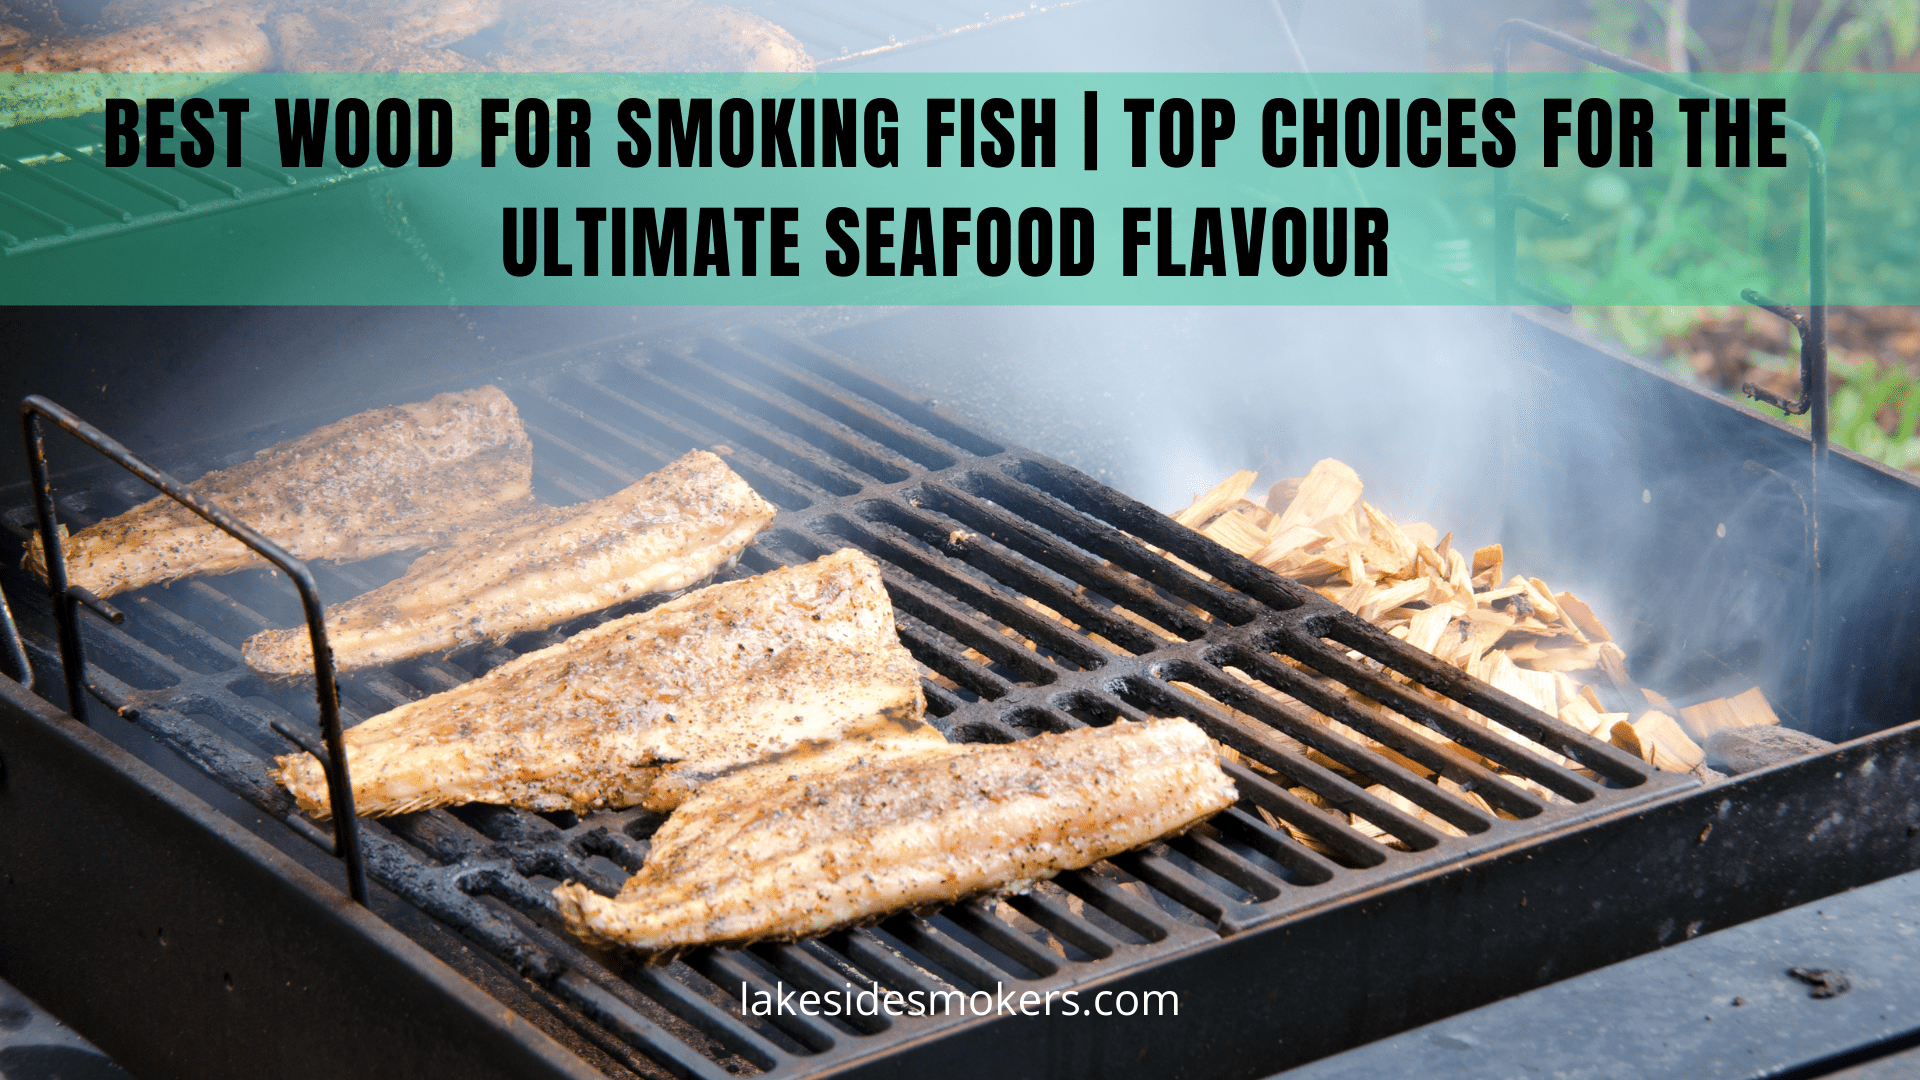 Best wood for smoking fish | Top choices for the ultimate seafood flavour